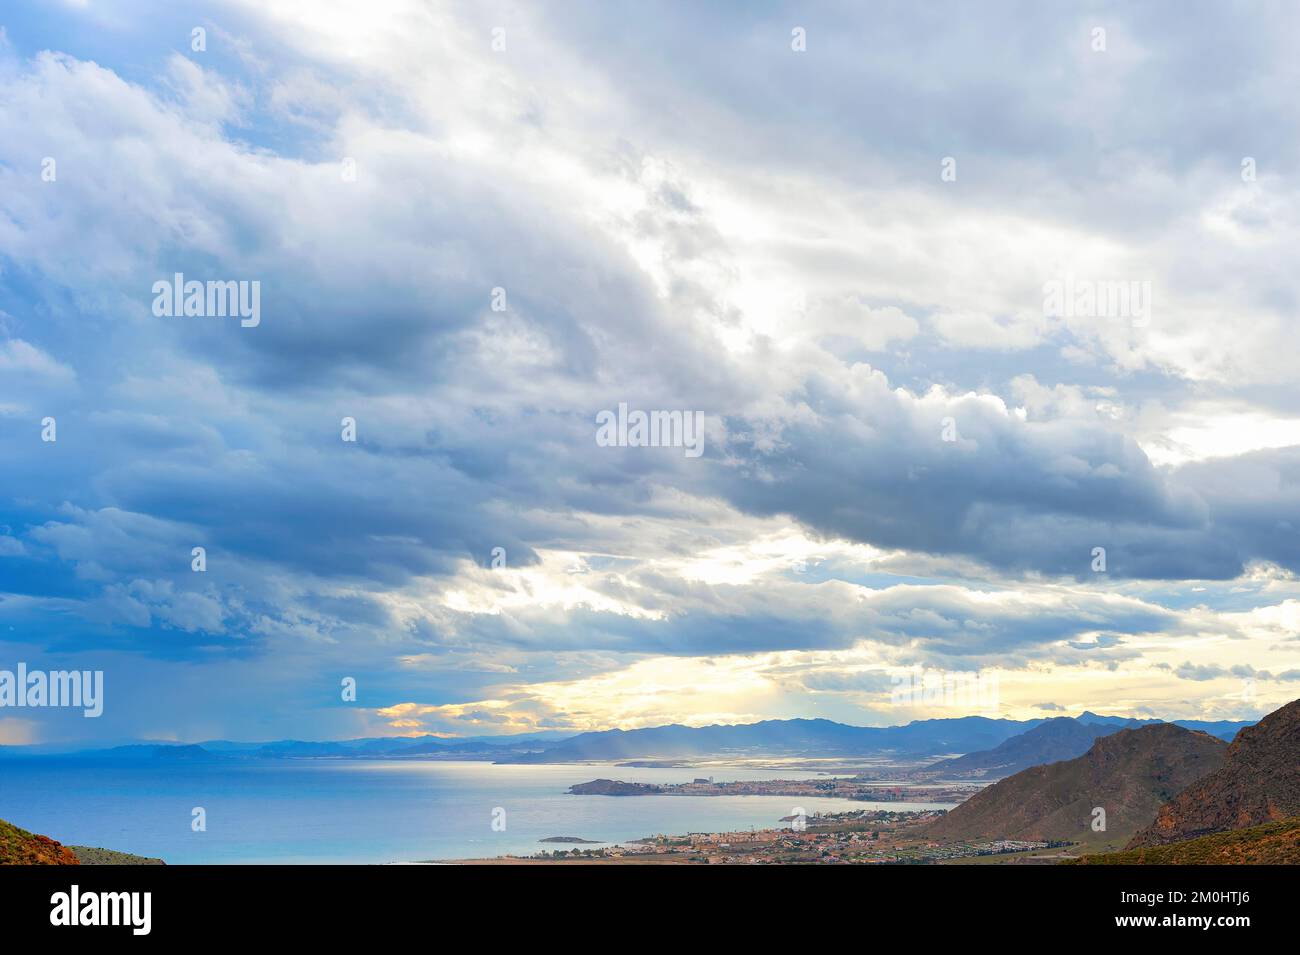 Landscape with stormy clouds sky over sea, Spain Stock Photo